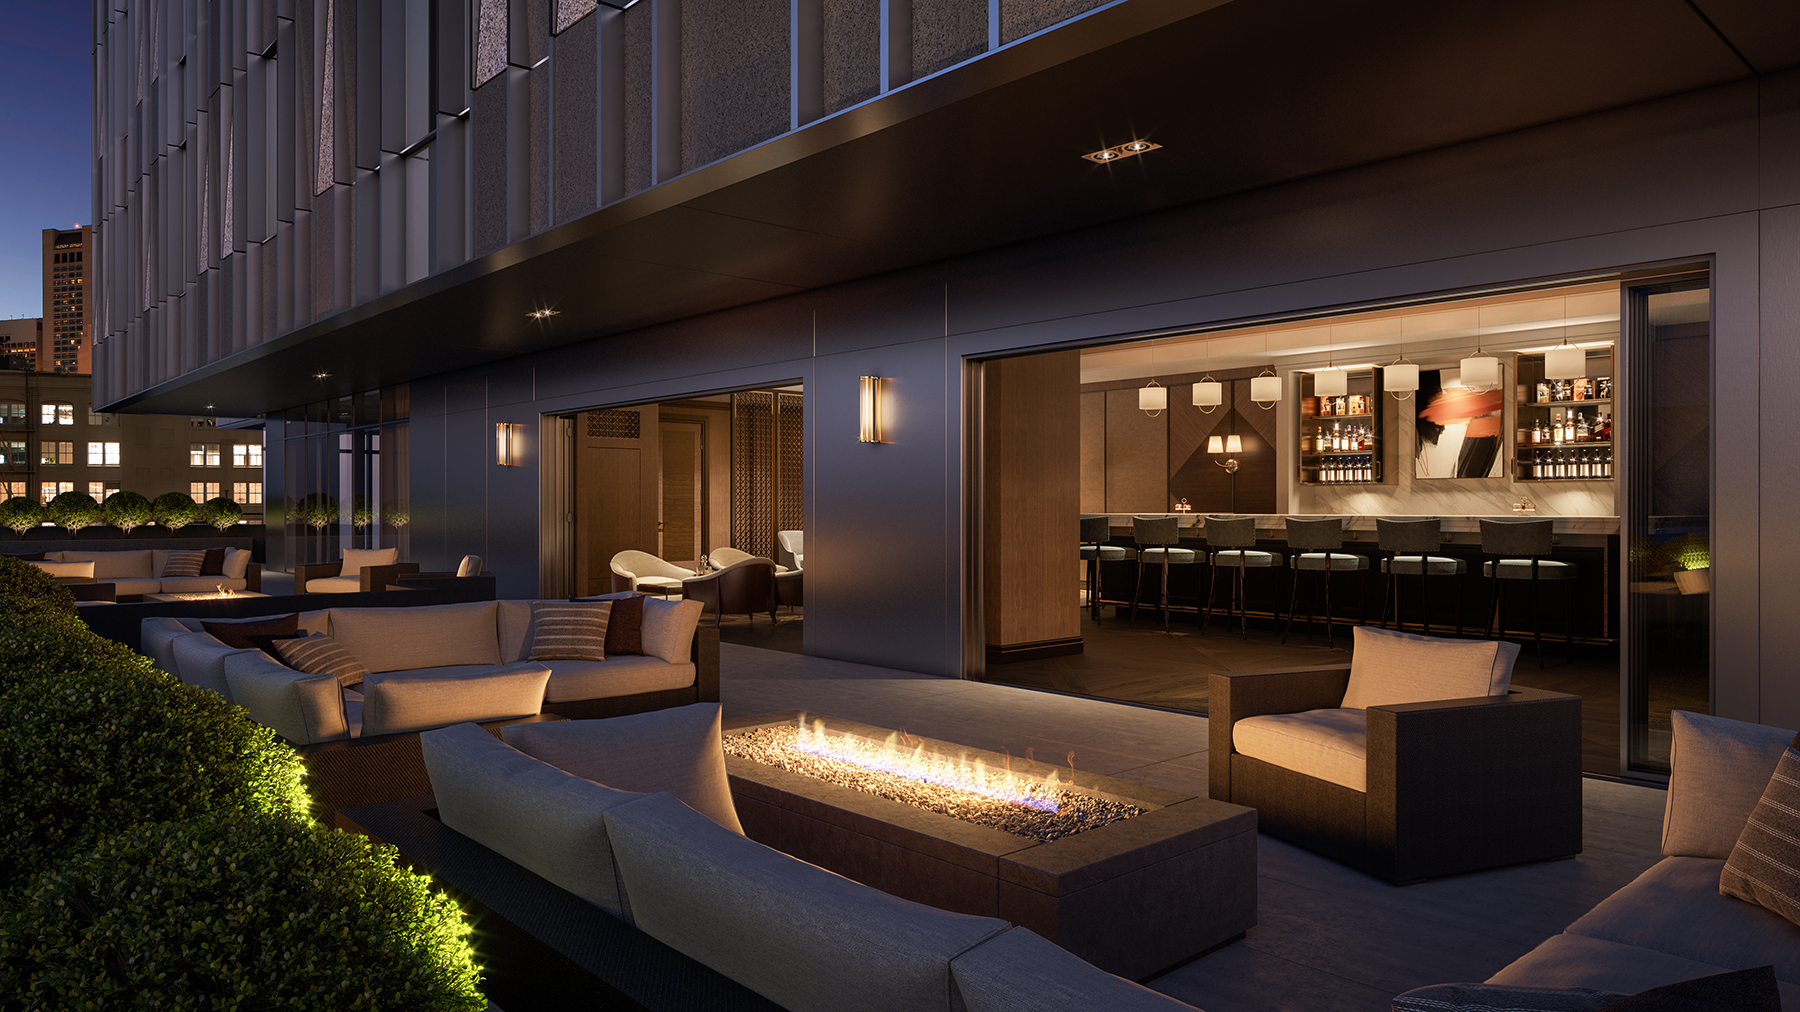 Rendering of the Club Terrace, image by Steelblue courtesy 706sf